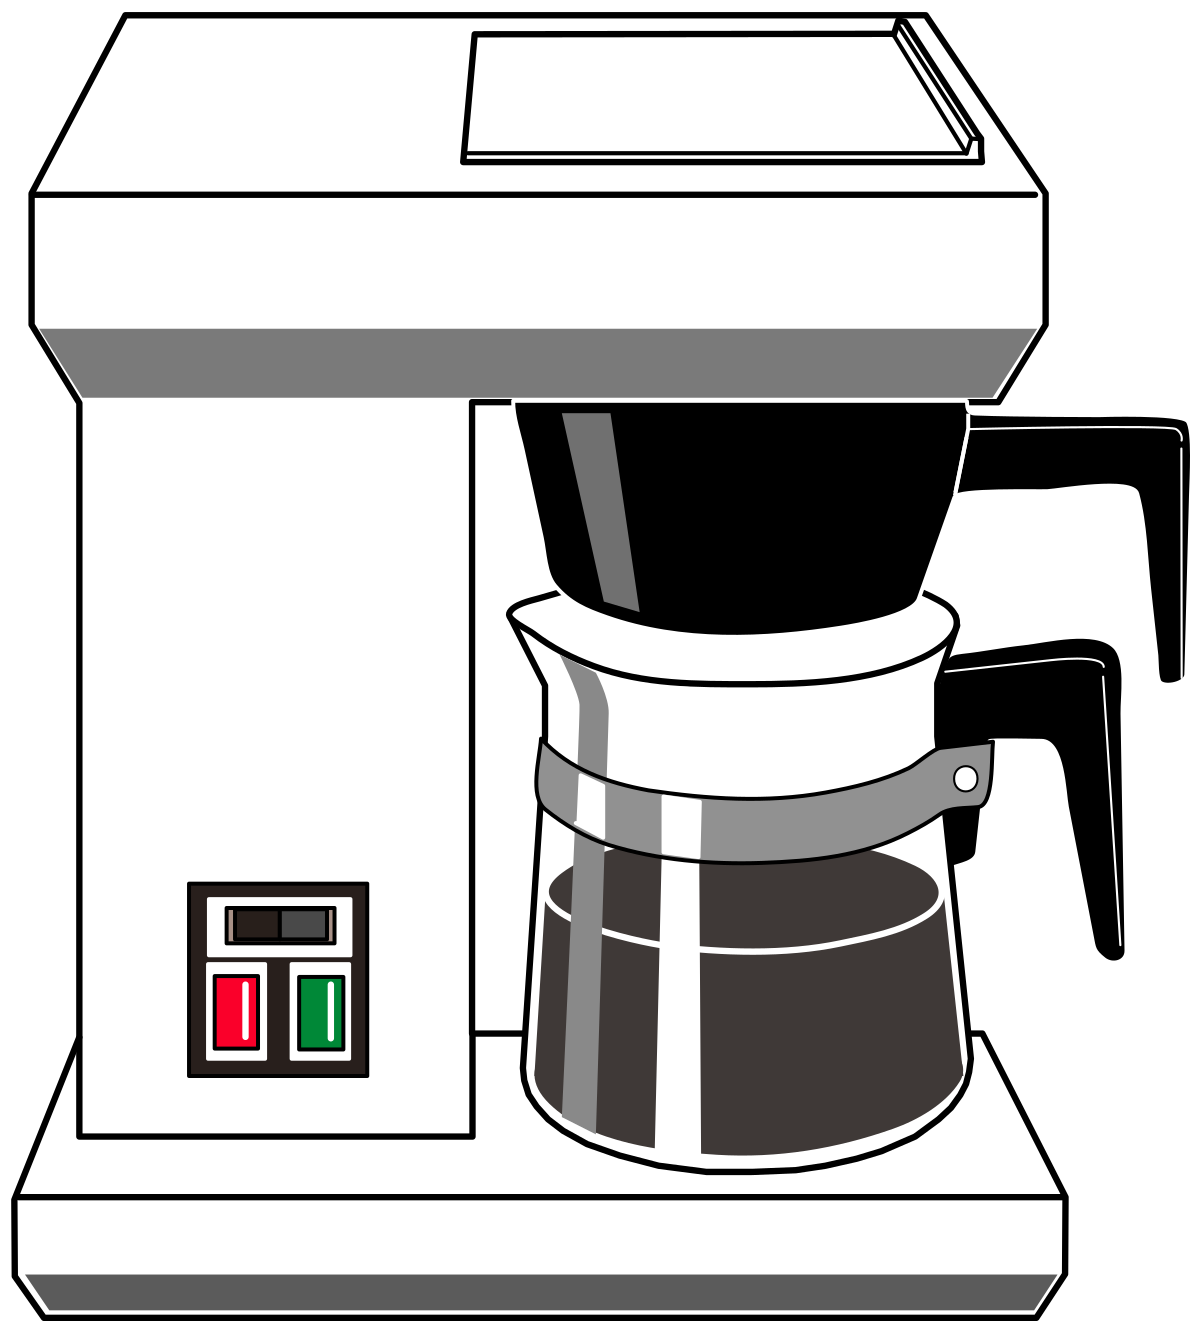 Download File:Drip coffee maker.svg - Wikimedia Commons